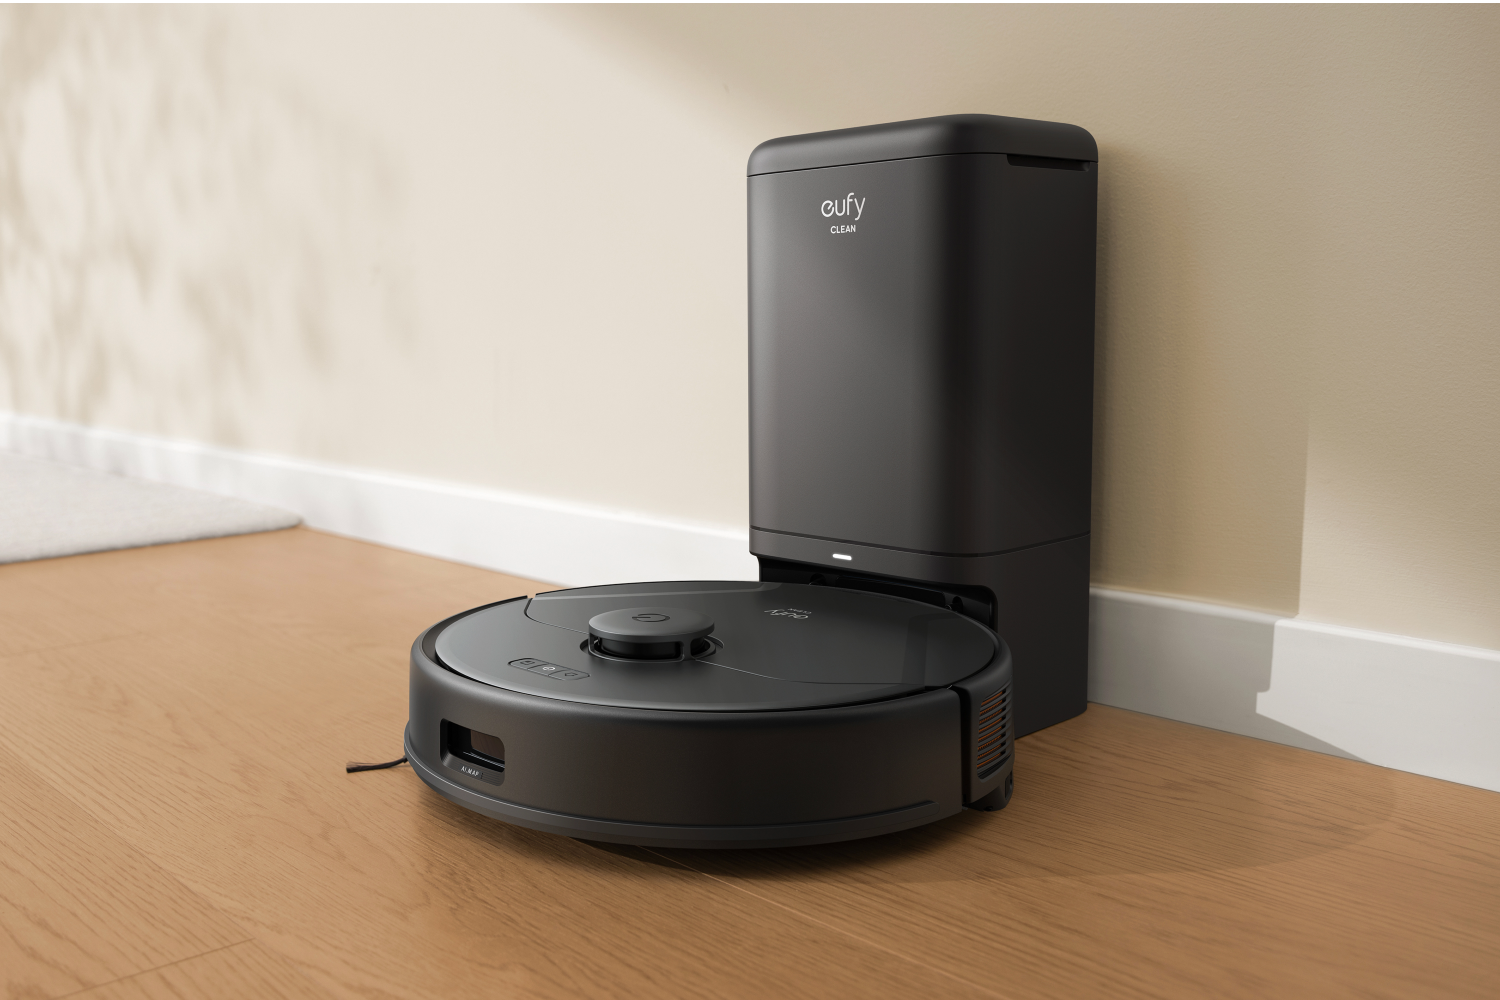 A black Eufy X8 Pro robot vacuum cleaner and base on a wooden floor